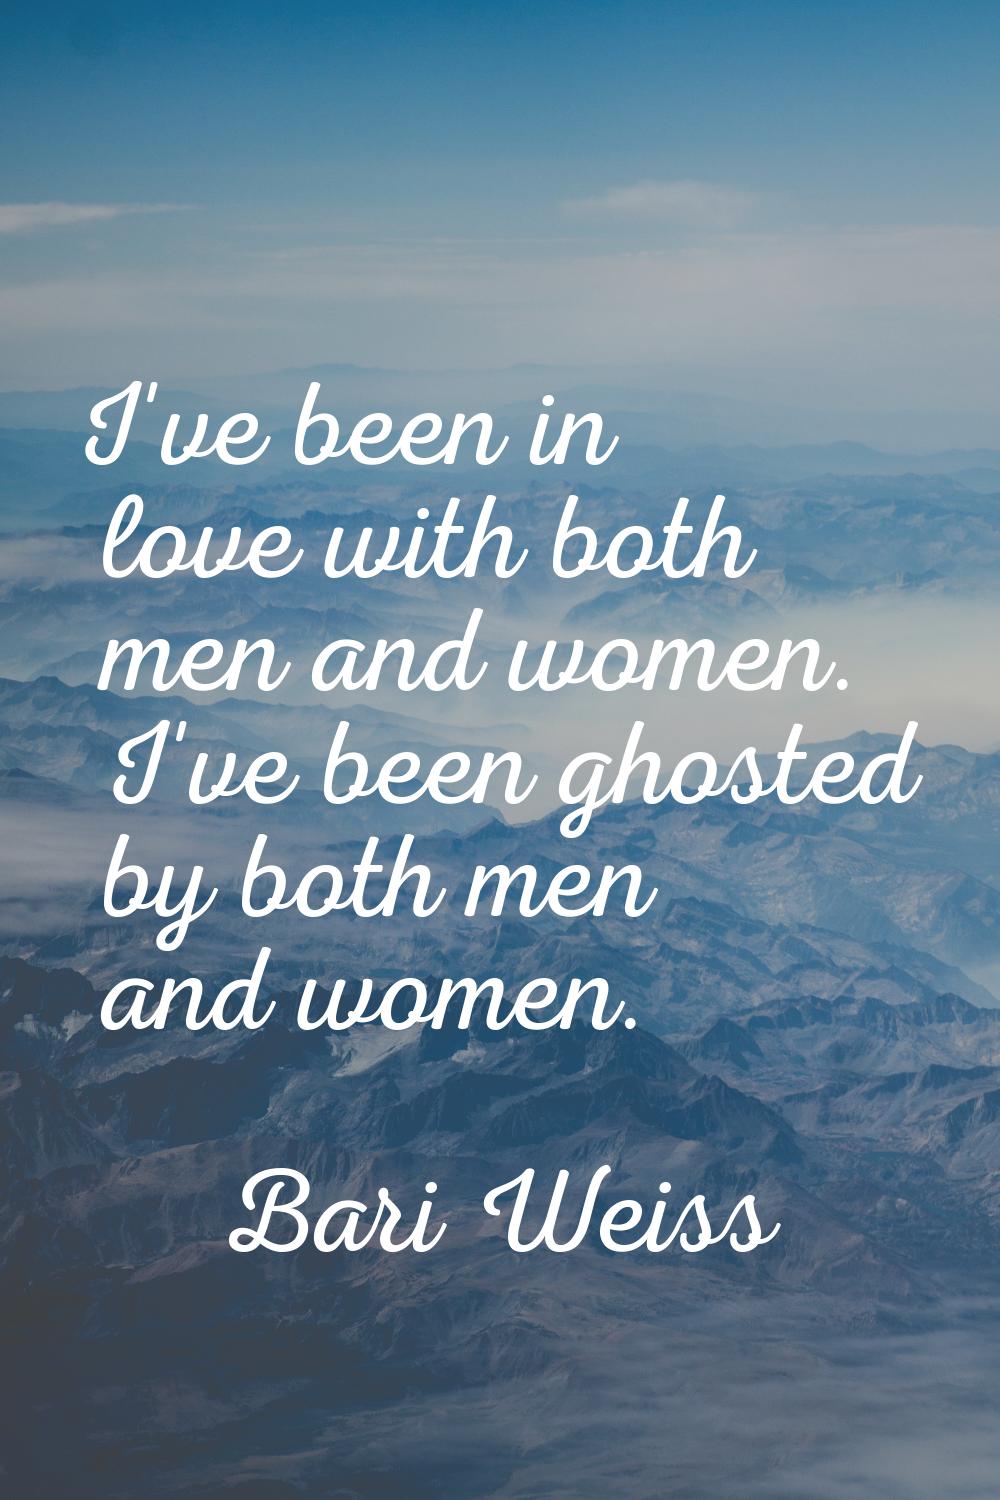 I've been in love with both men and women. I've been ghosted by both men and women.